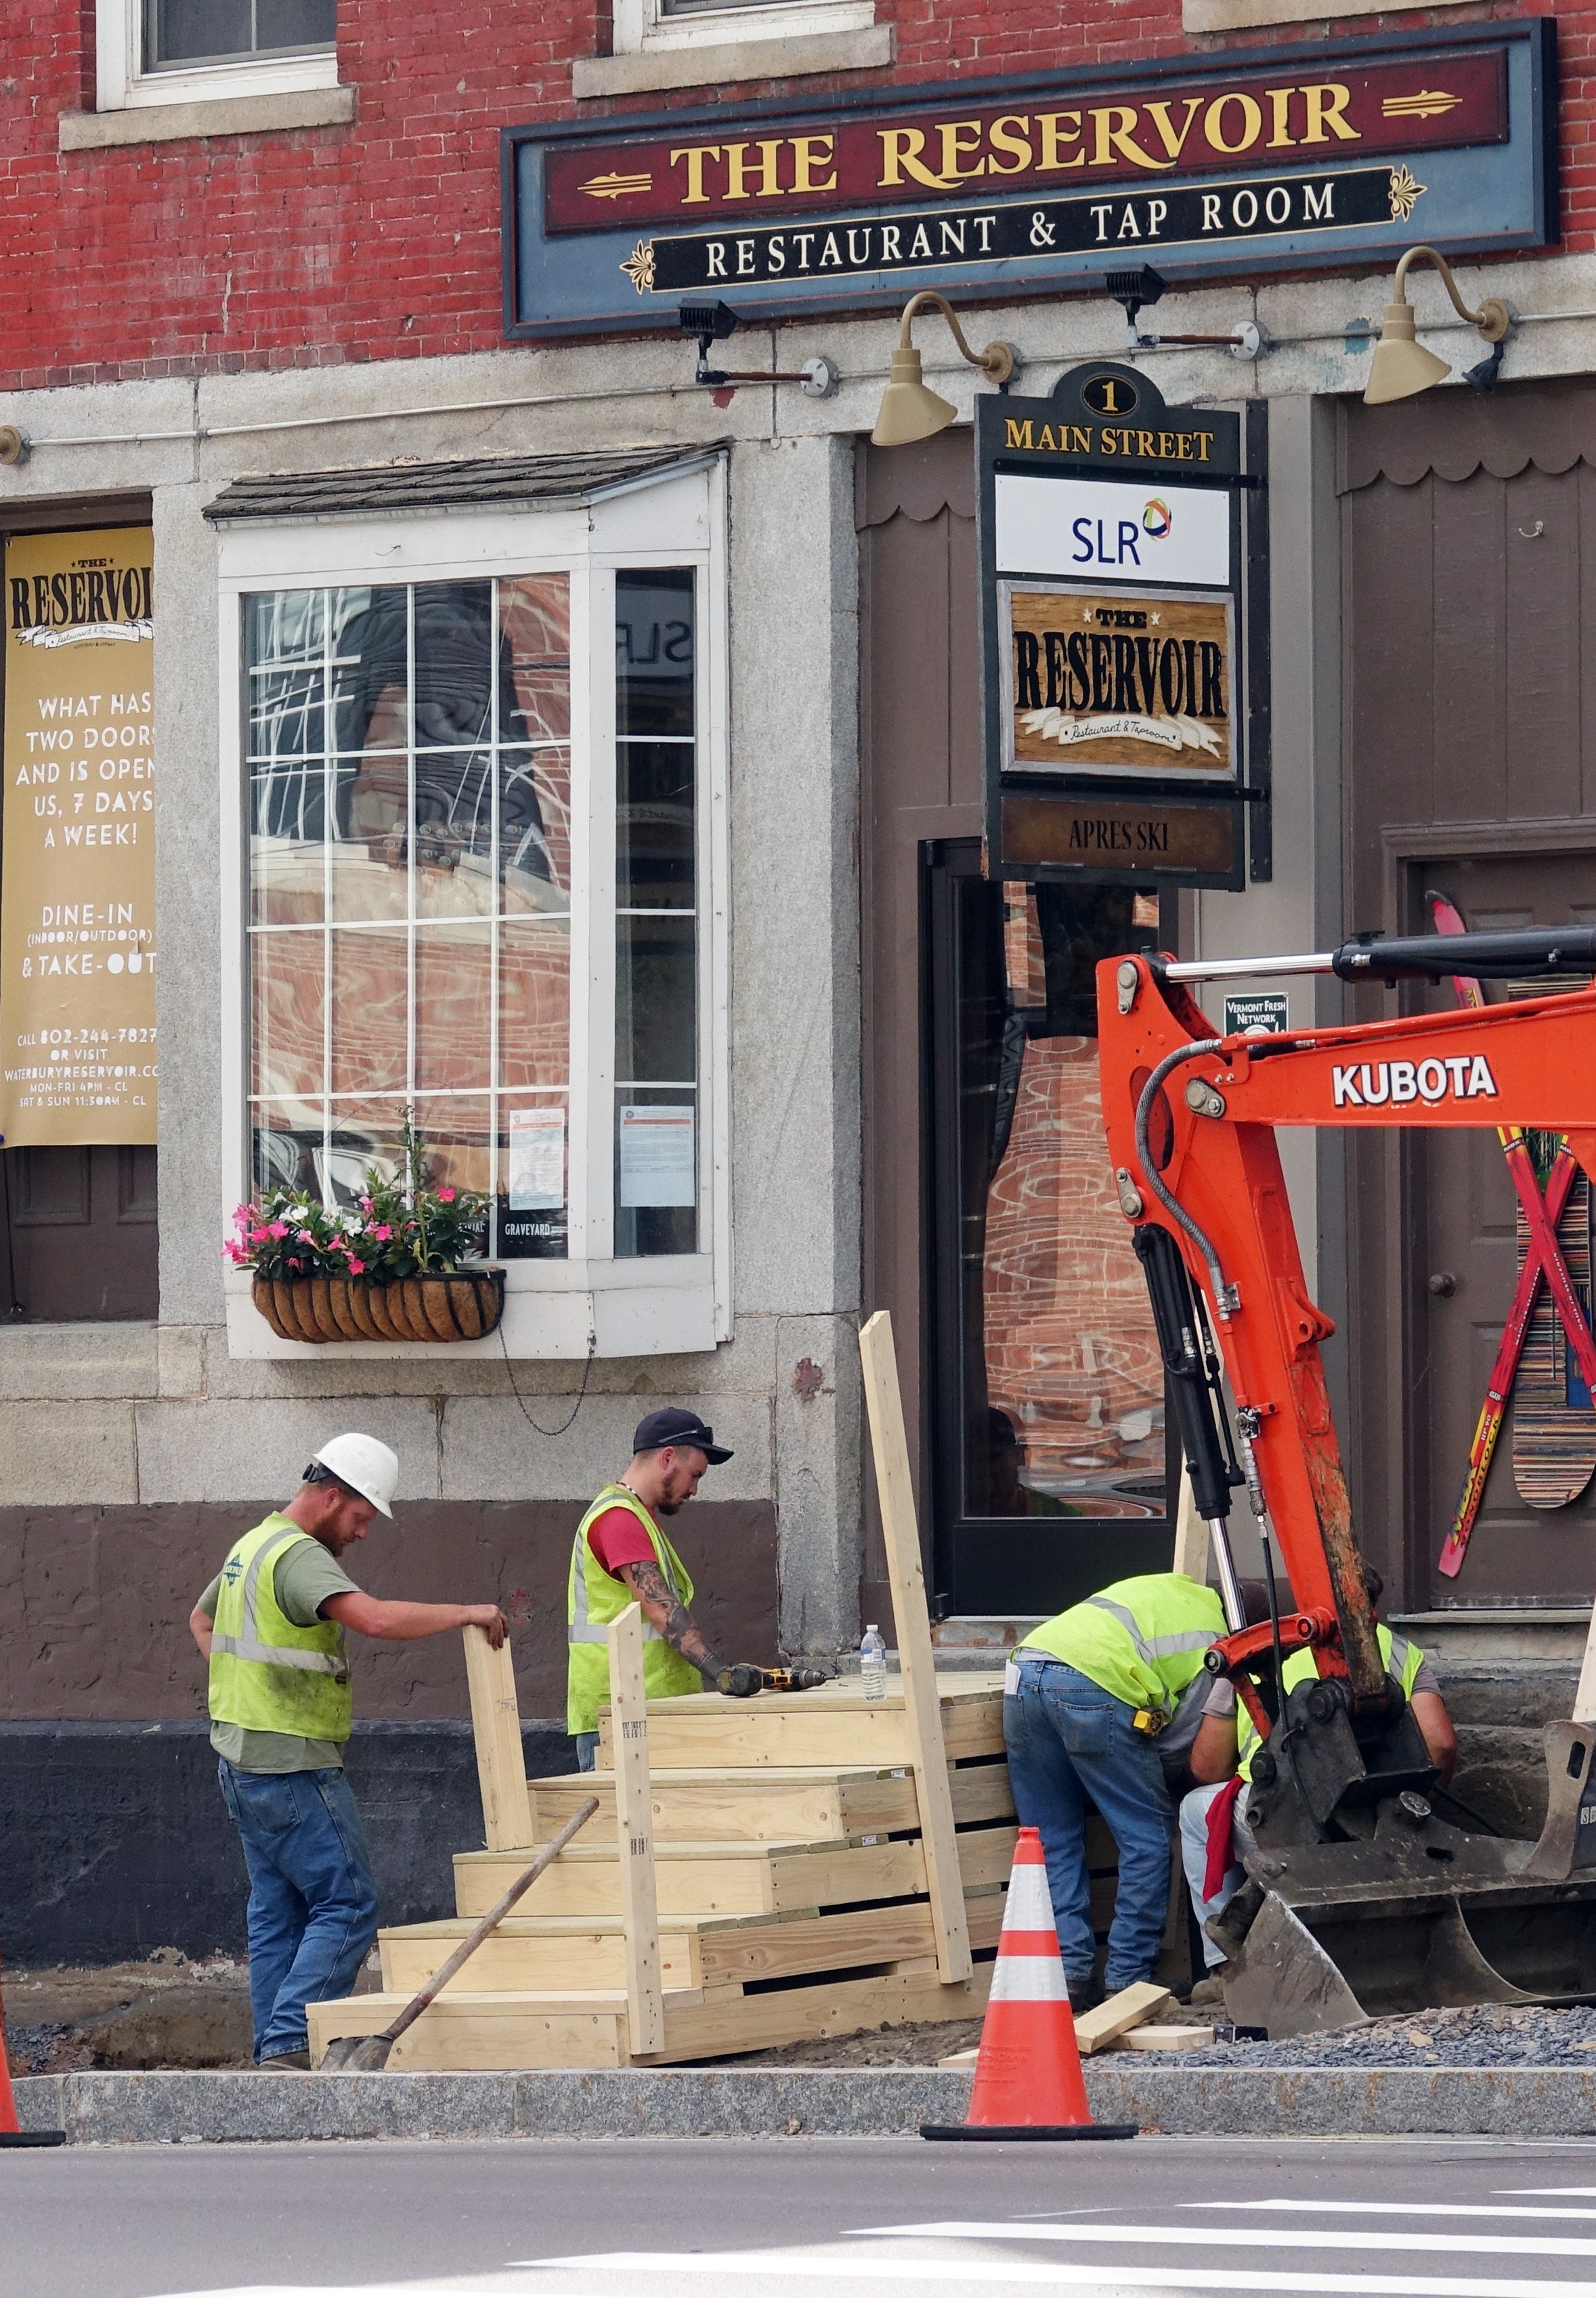  Some businesses along the construction corridor needed updates to accommodate new sidewalks, curbs and traffic signals. Photo by Gordon Miller 